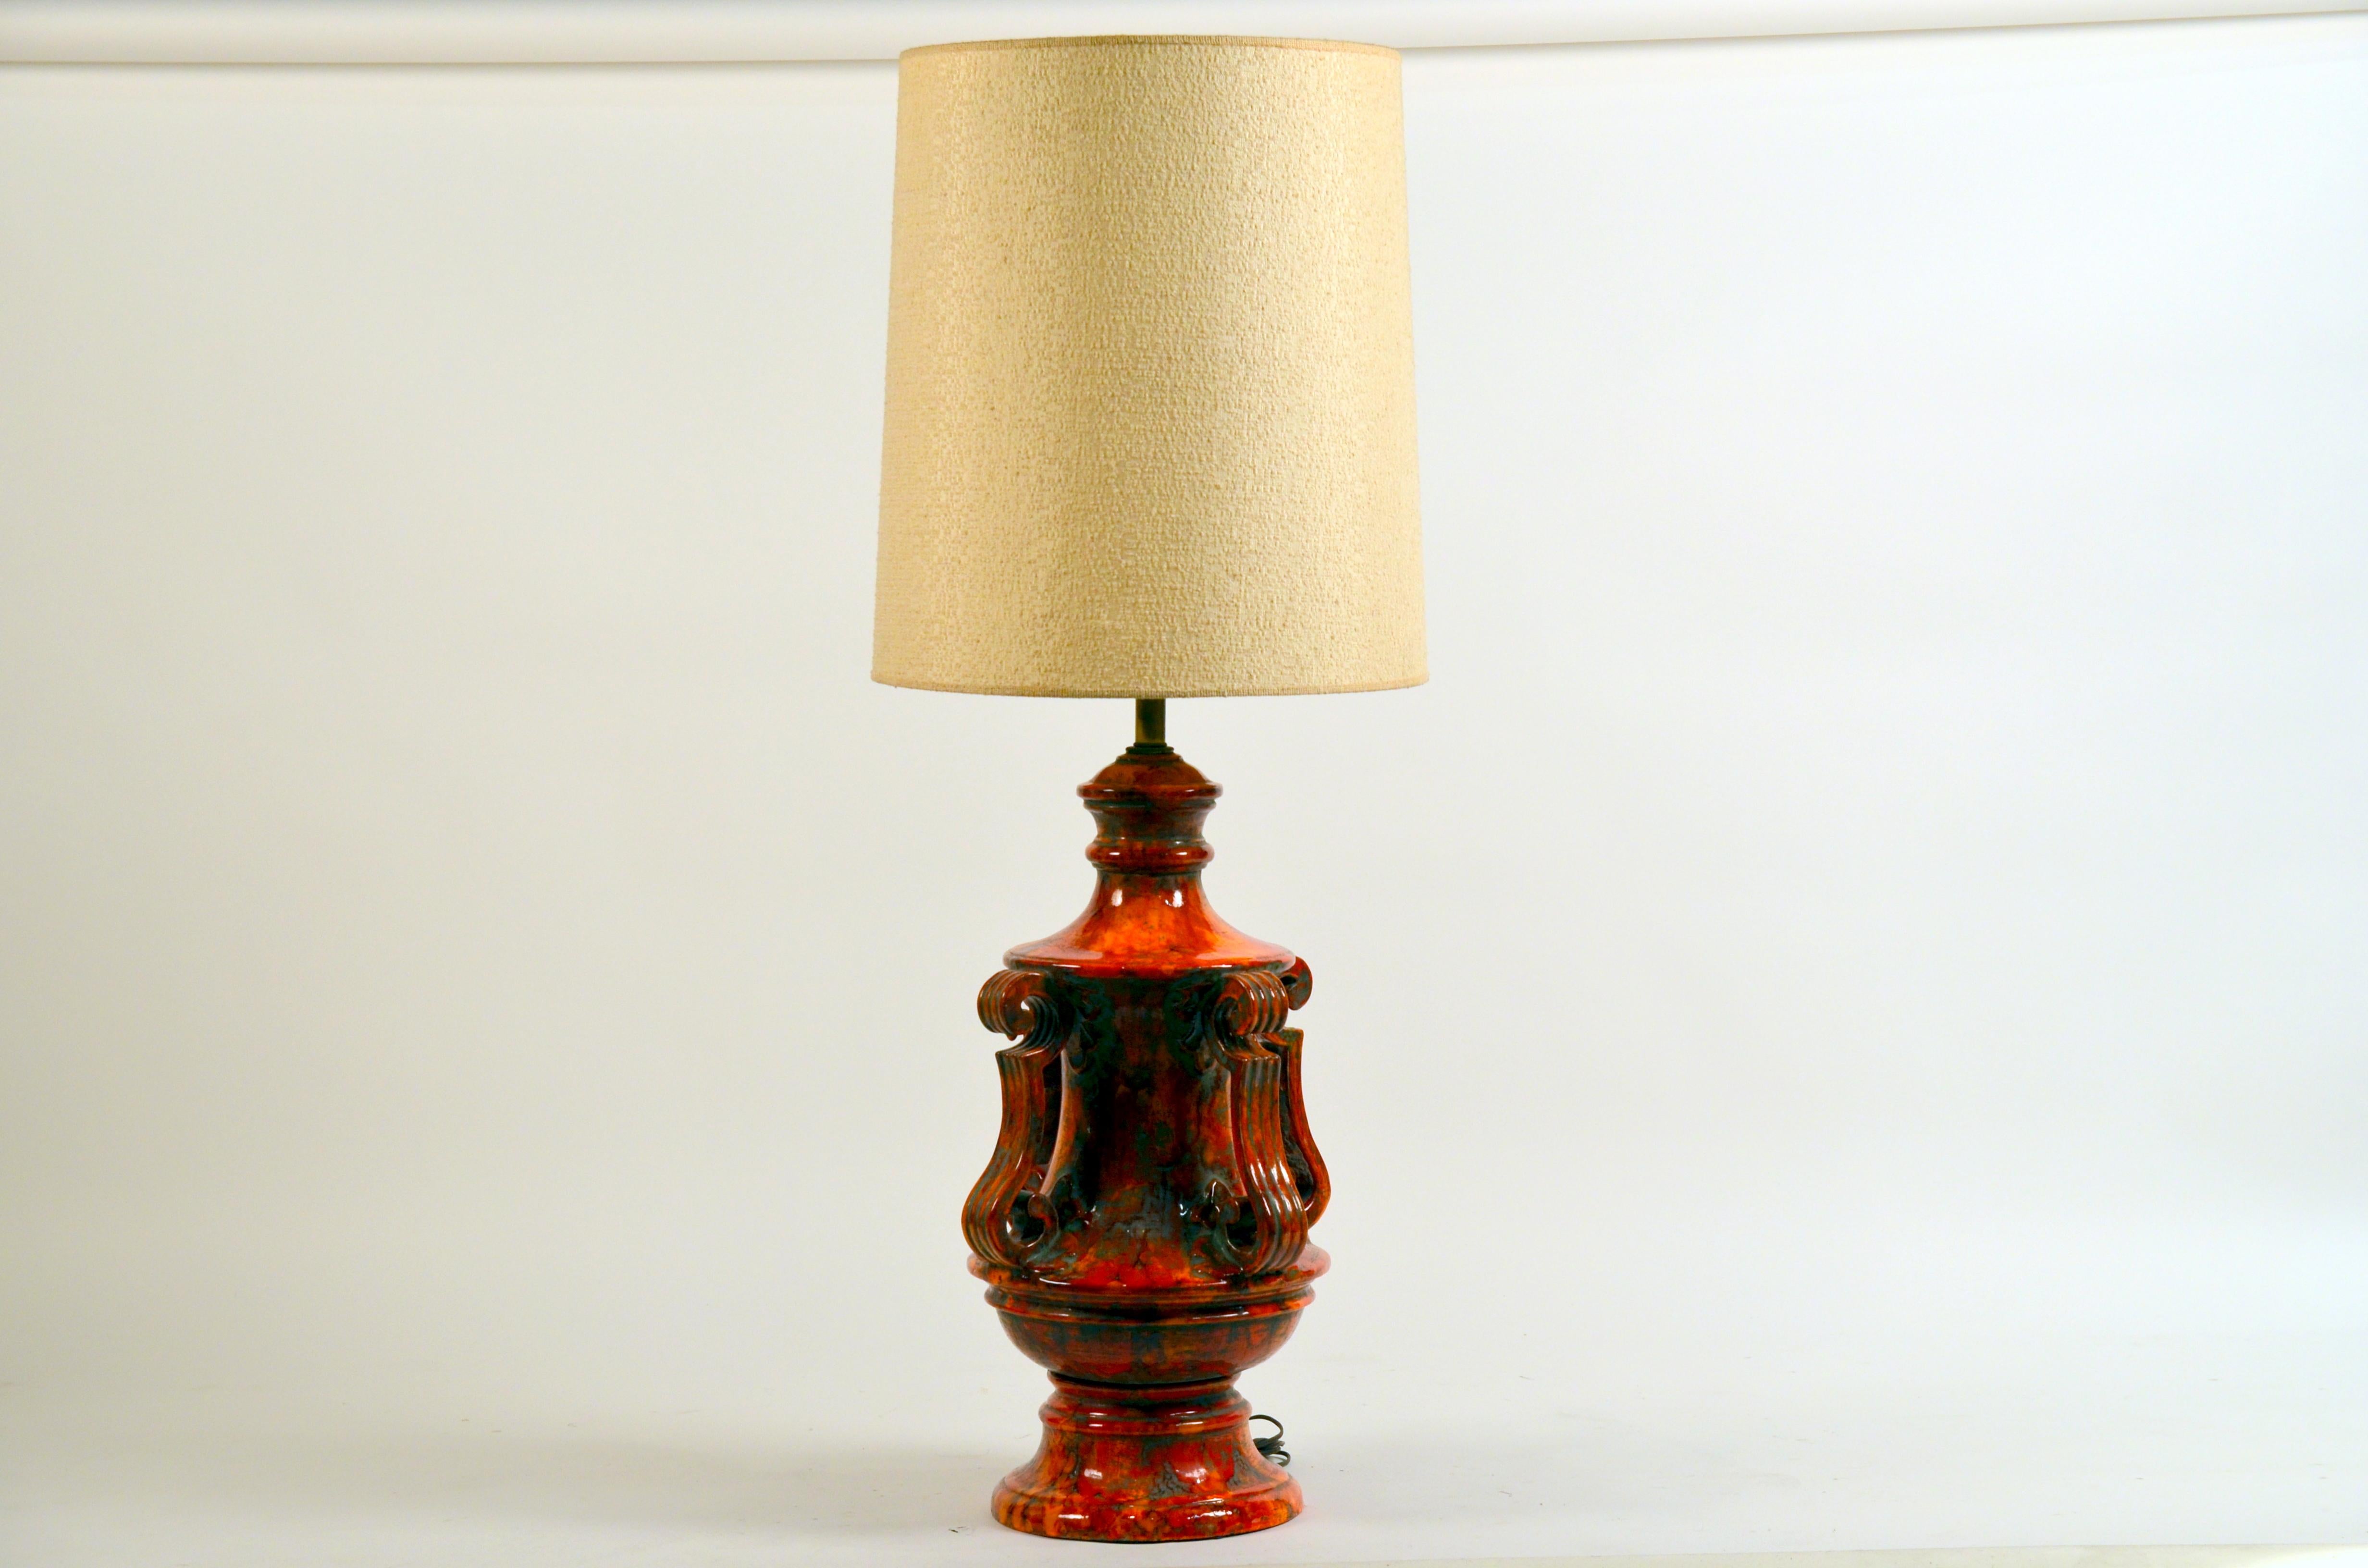 Monumental Hollywood Regency glazed ceramic lamp. Original shade included.

The ceramic portion of the base is 16 in. diameter x 26 in. tall.